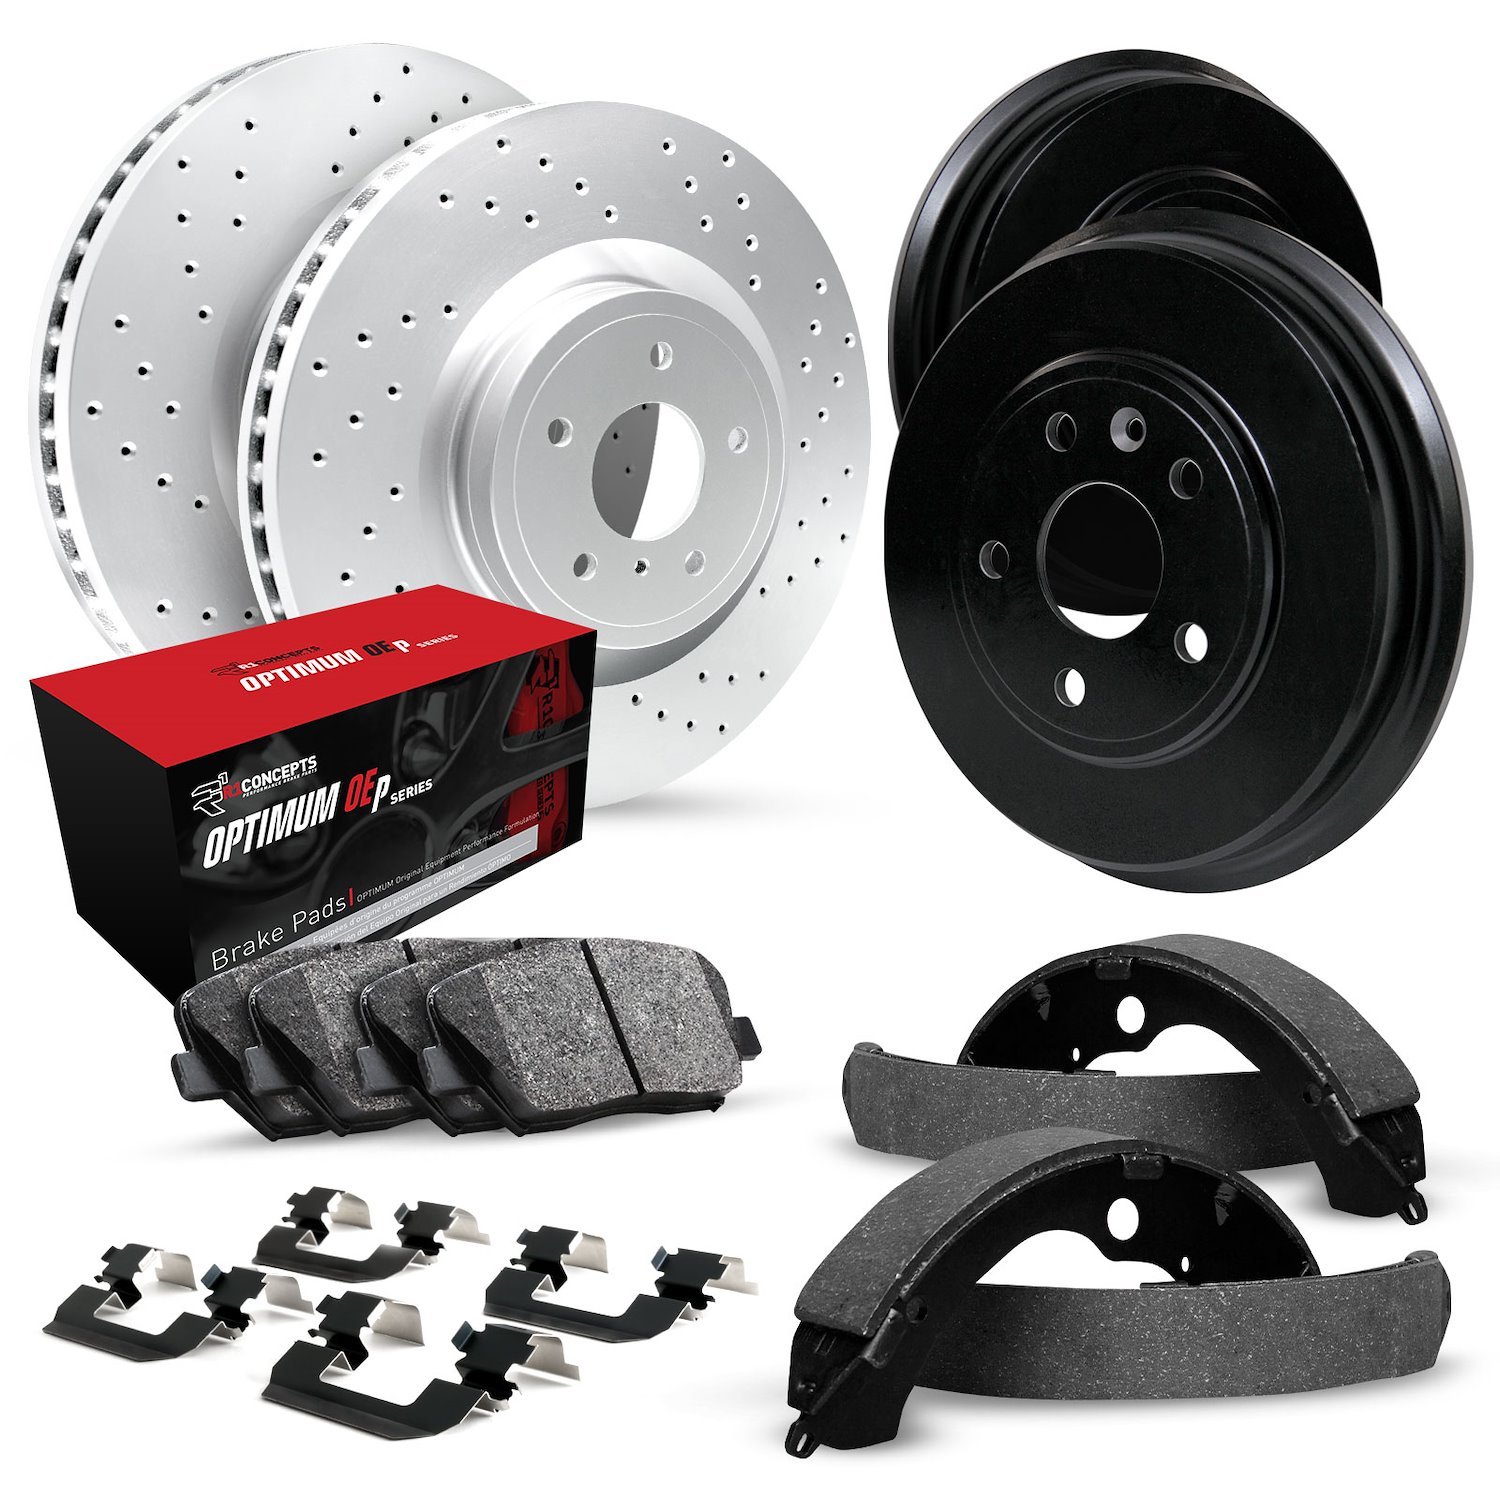 GEO-Carbon Drilled Brake Rotor & Drum Set w/Optimum OE Pads, Shoes, & Hardware, 1979-1991 GM, Position: Front & Rear